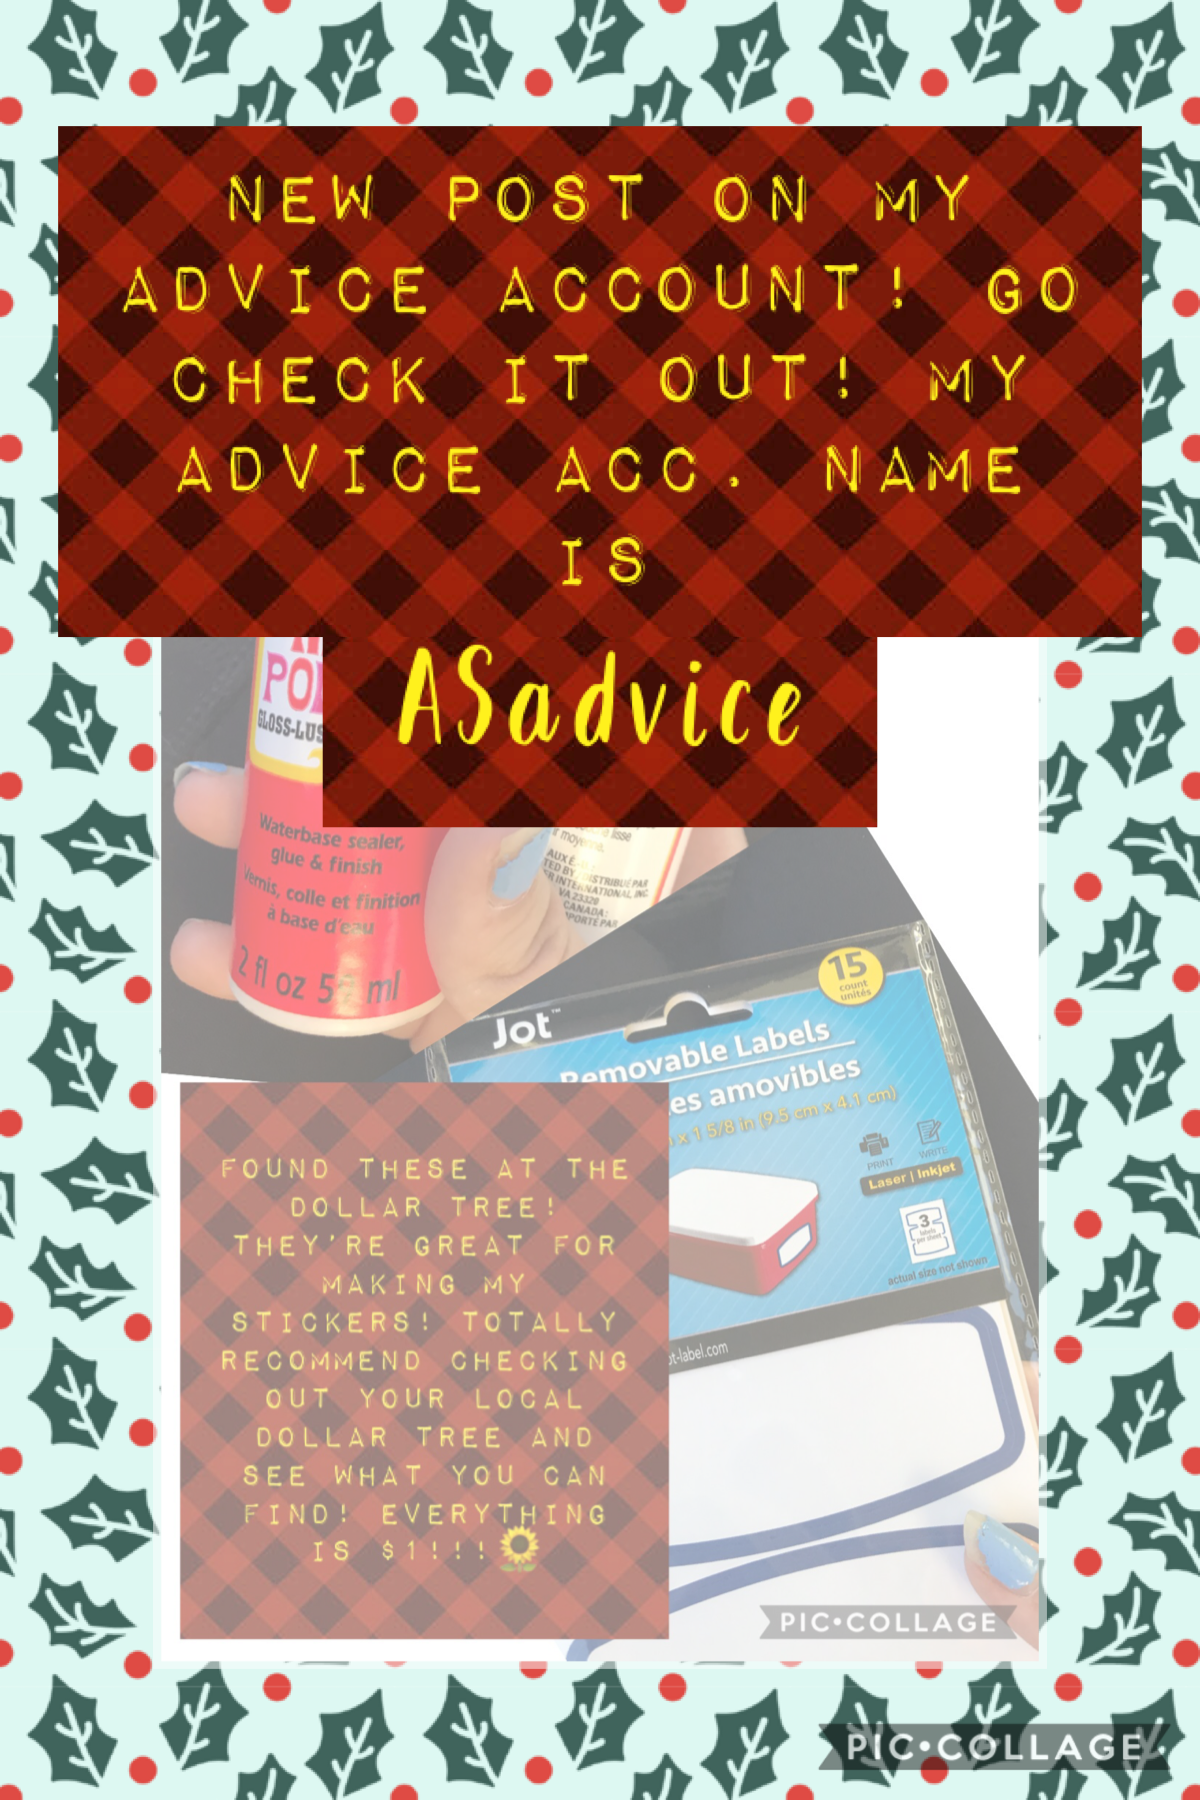 Go check out my new post @ASadvice